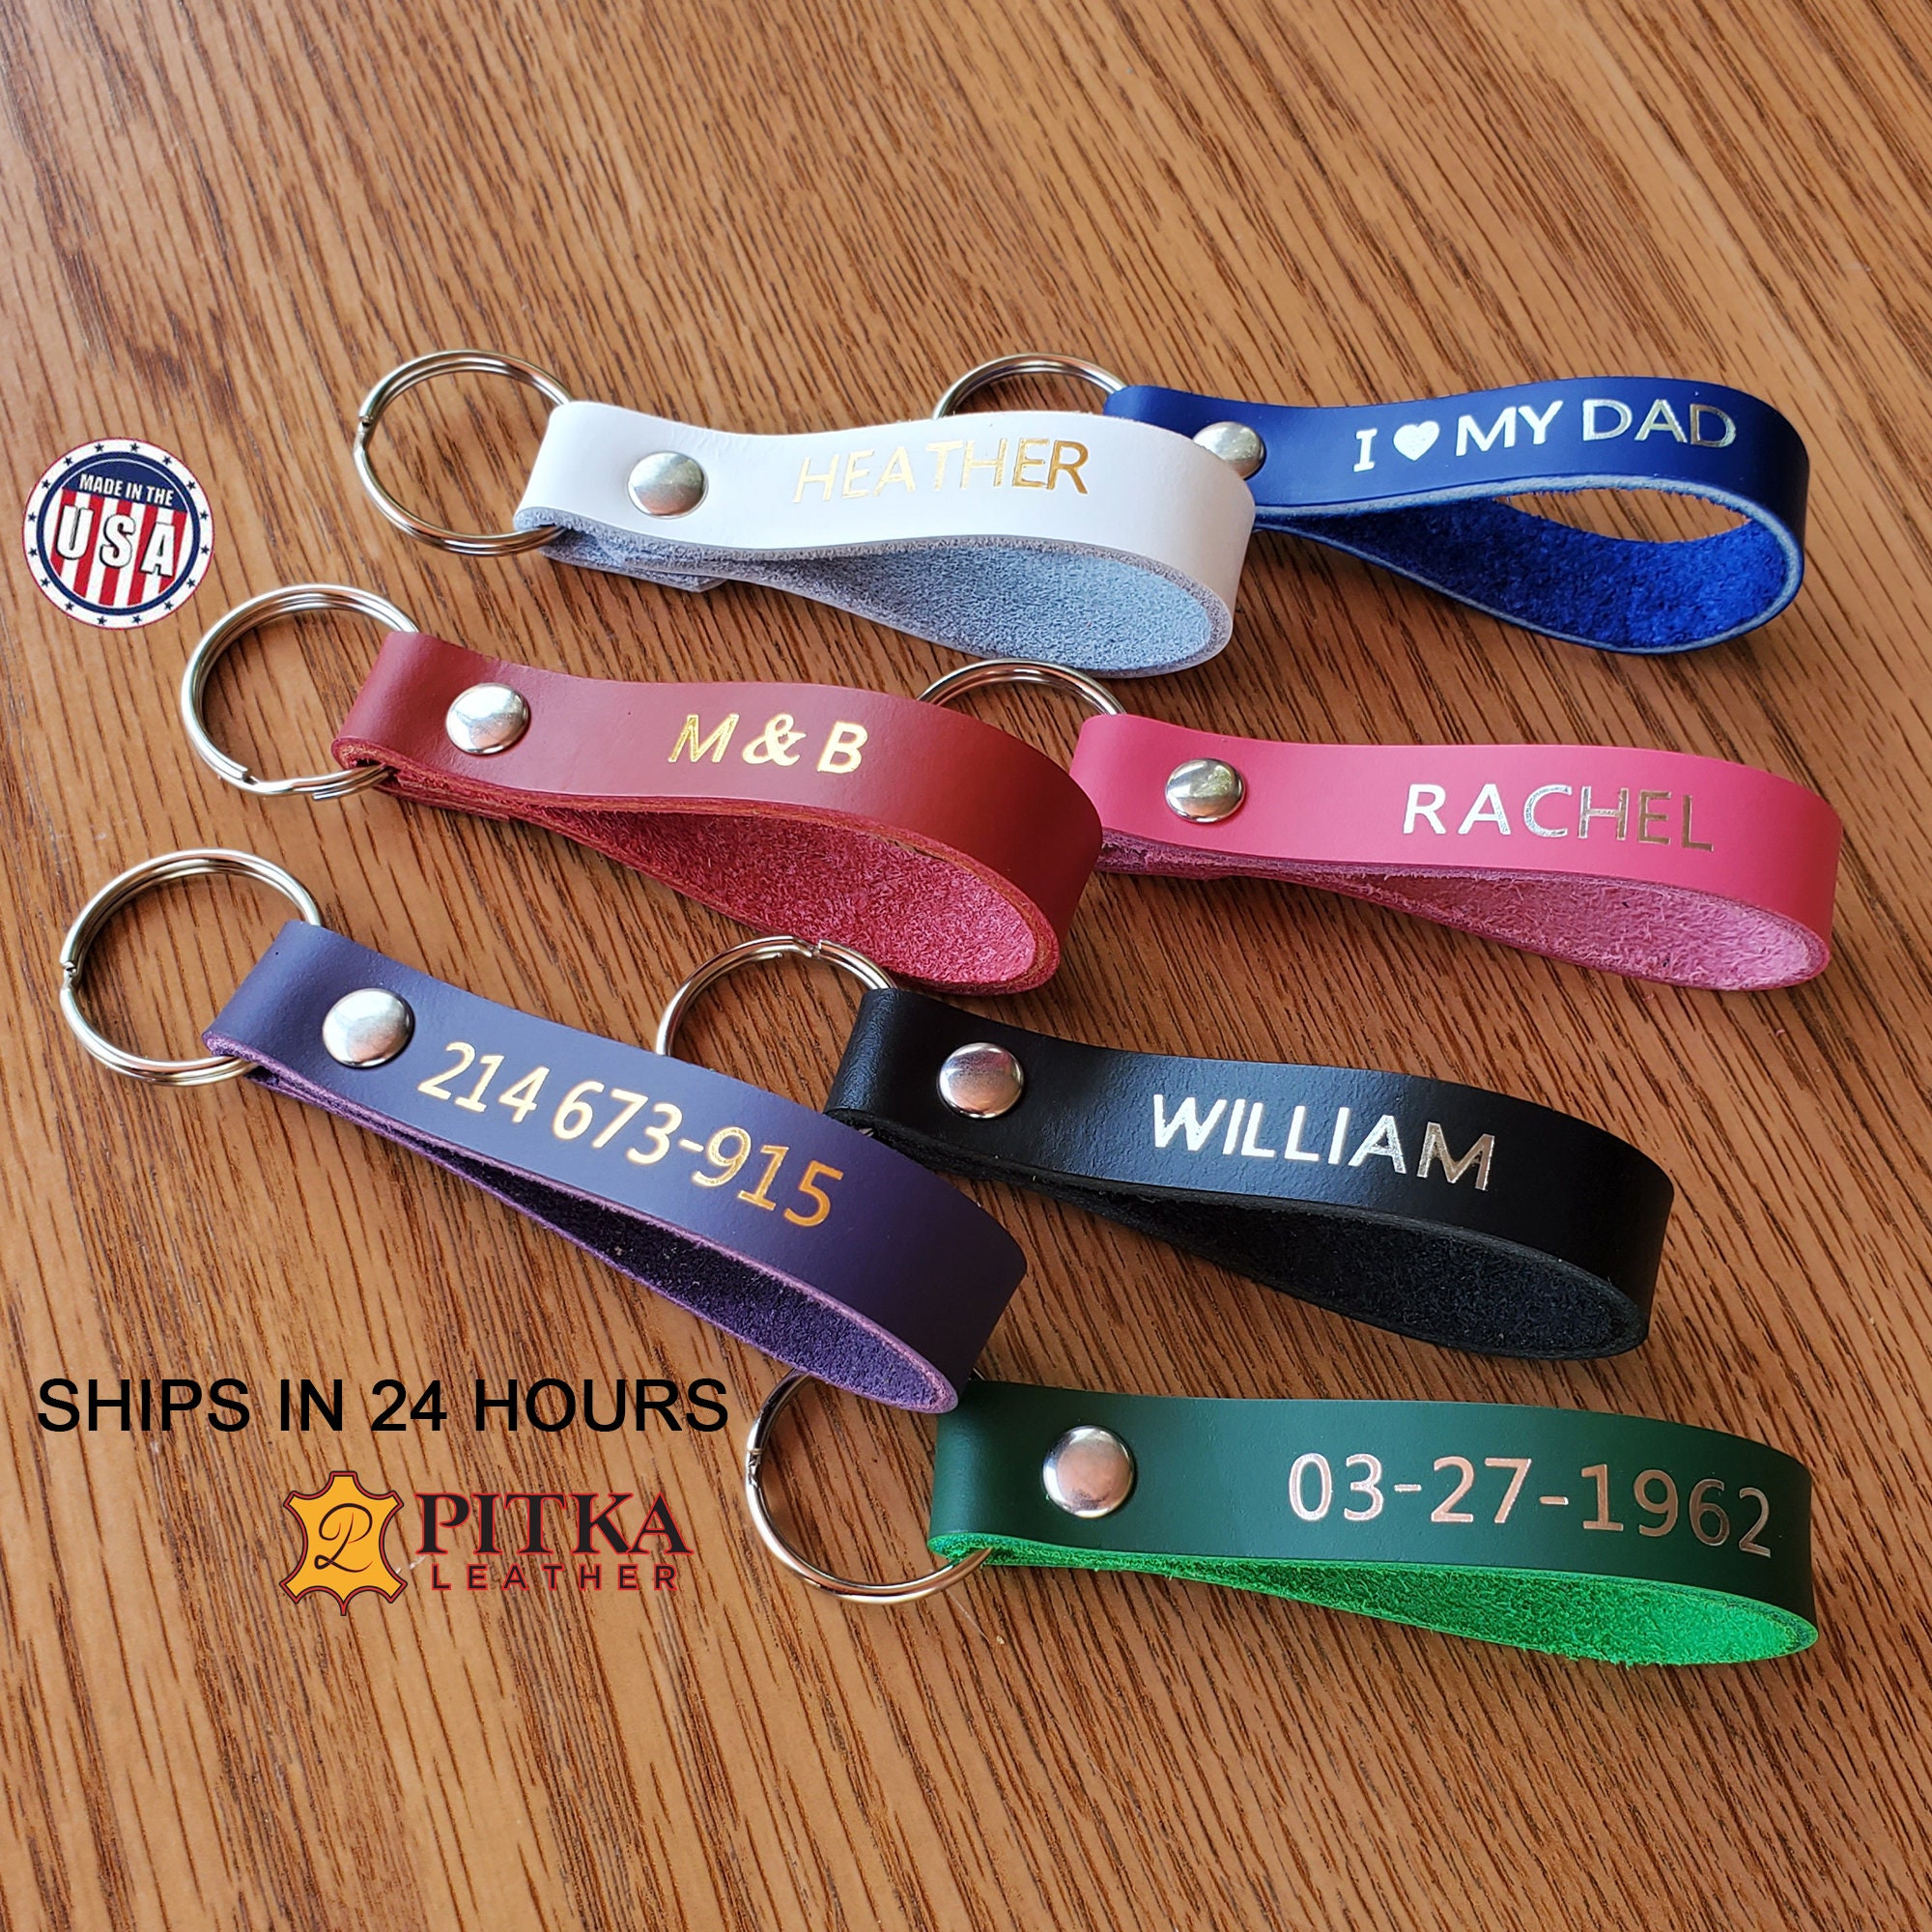 10 Packs Blank Leather Keychains -Engraving Ready Full Grain Leather  Keychains-Summer Camps, Promotions Ideas 